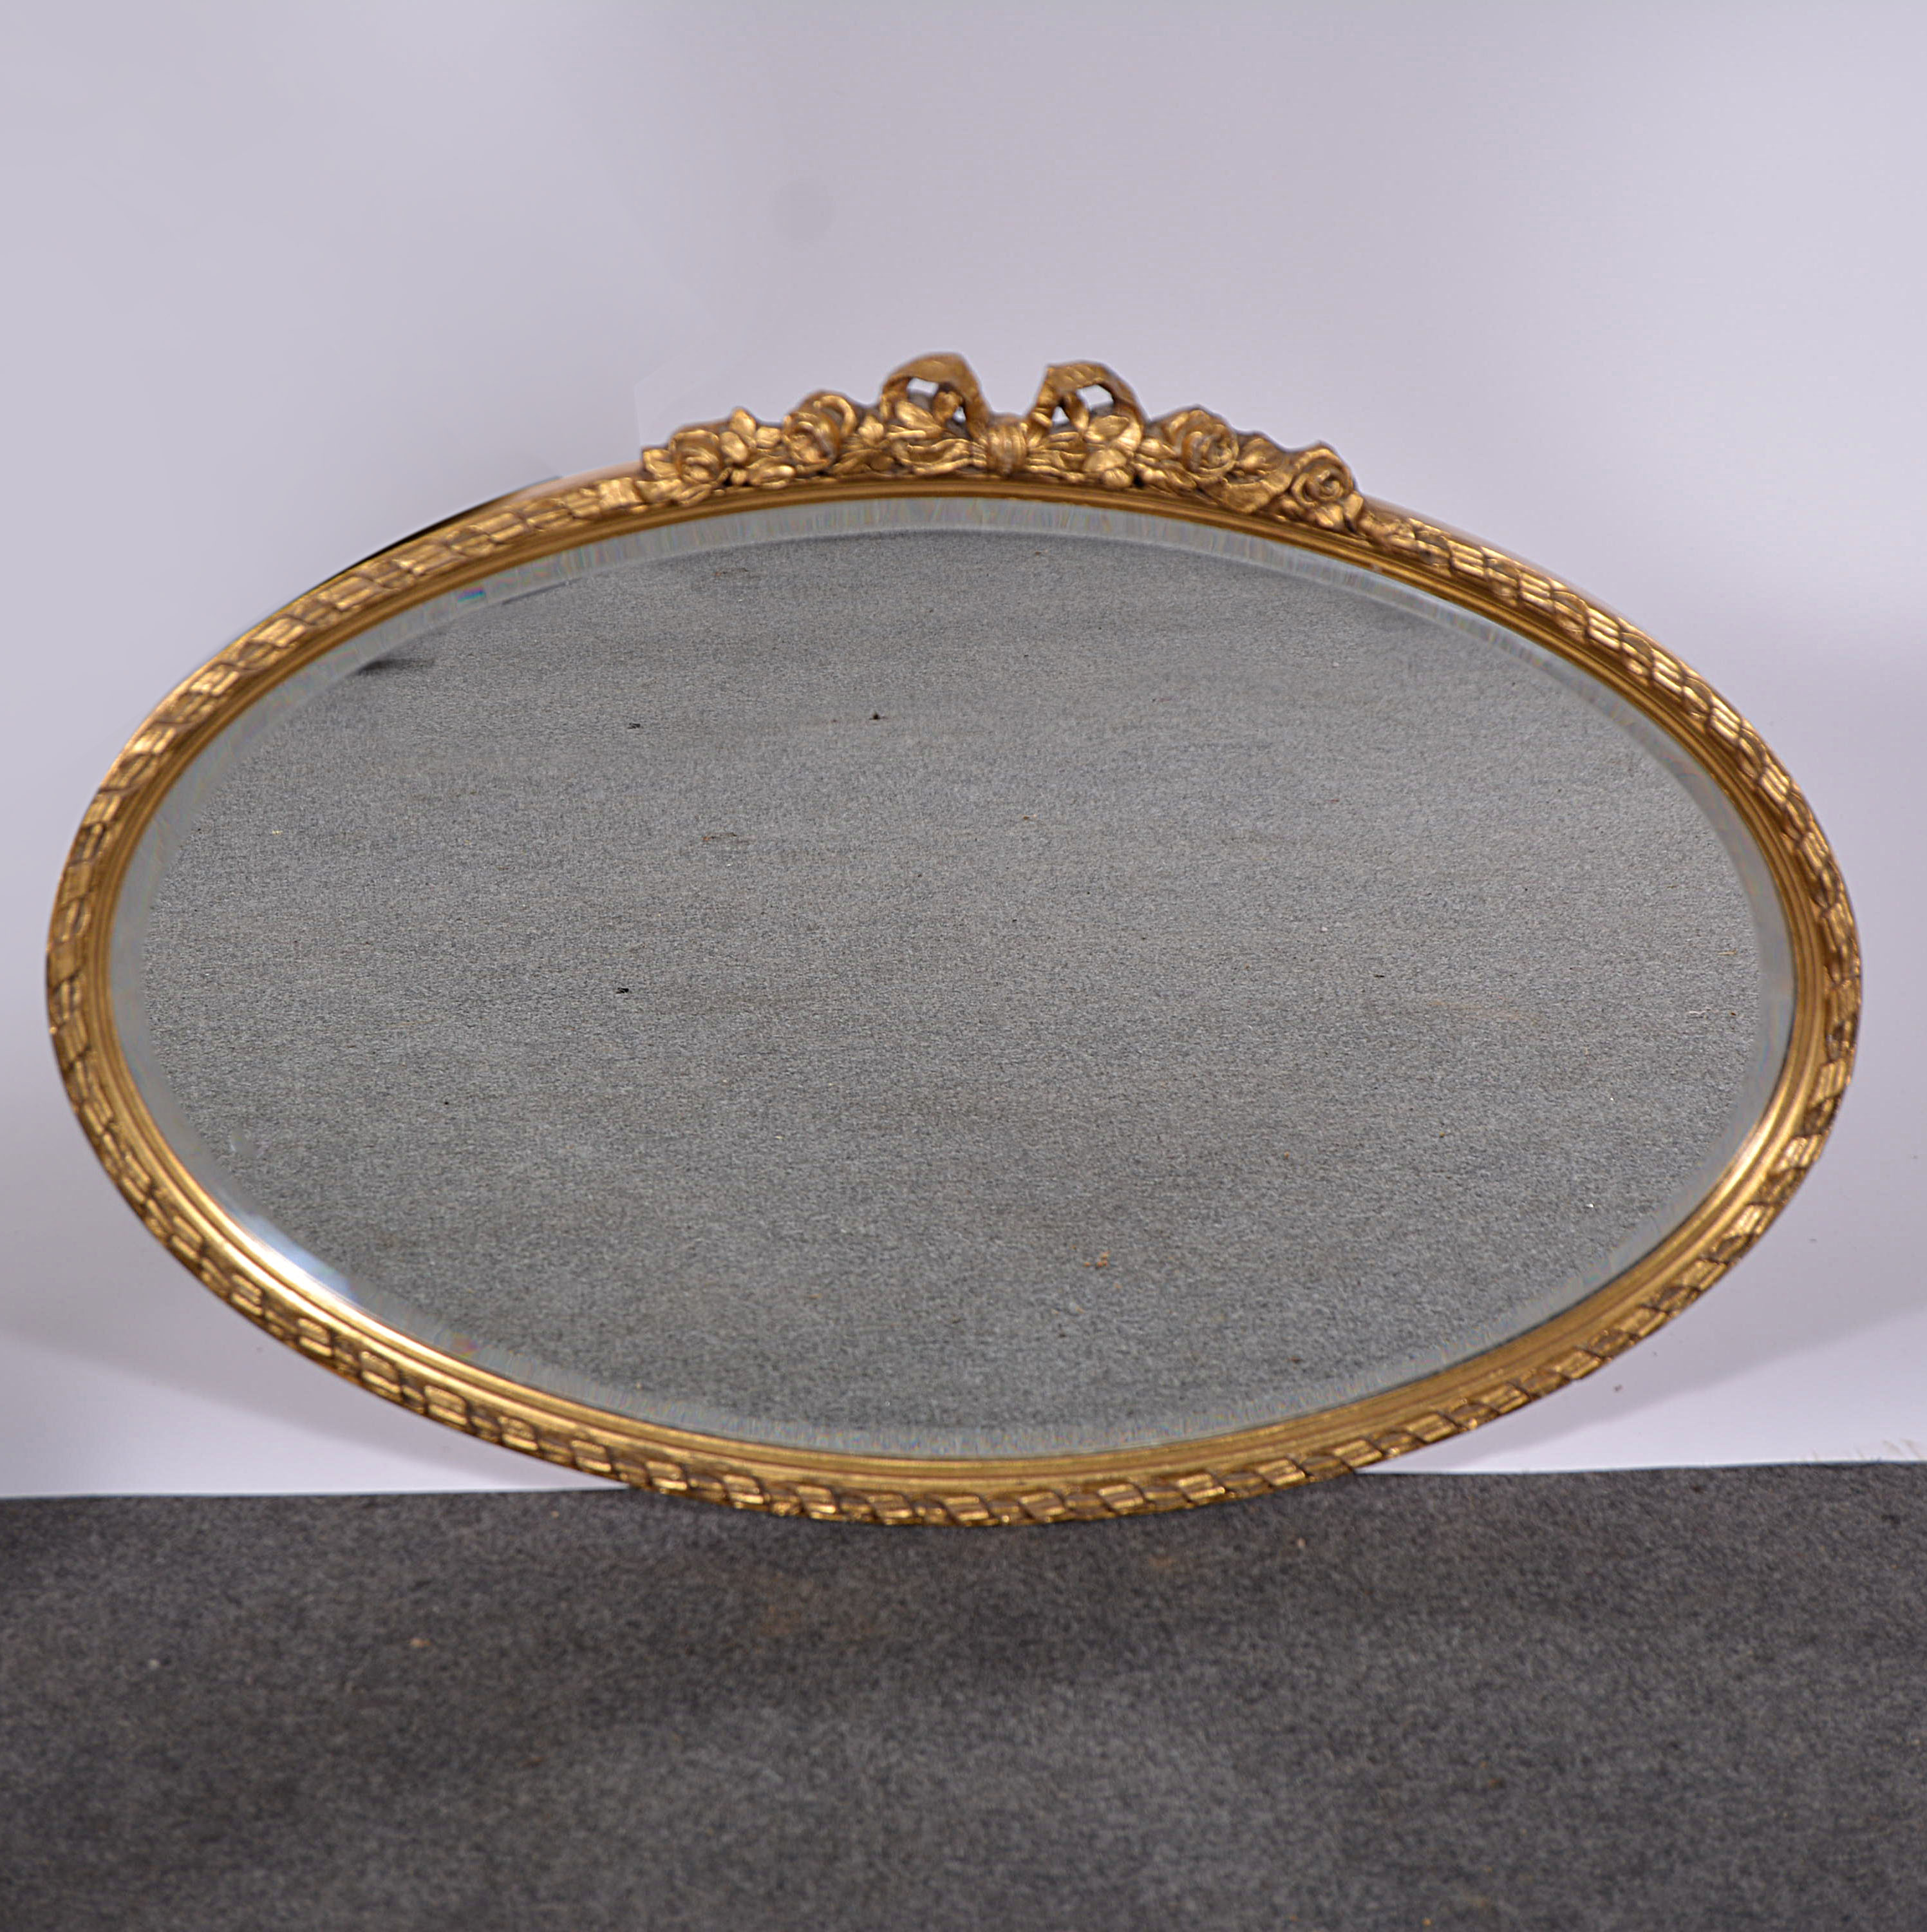 Oval wall mirror, gilded frame with flowers and ribbon ties above a plate, bevelled plate,